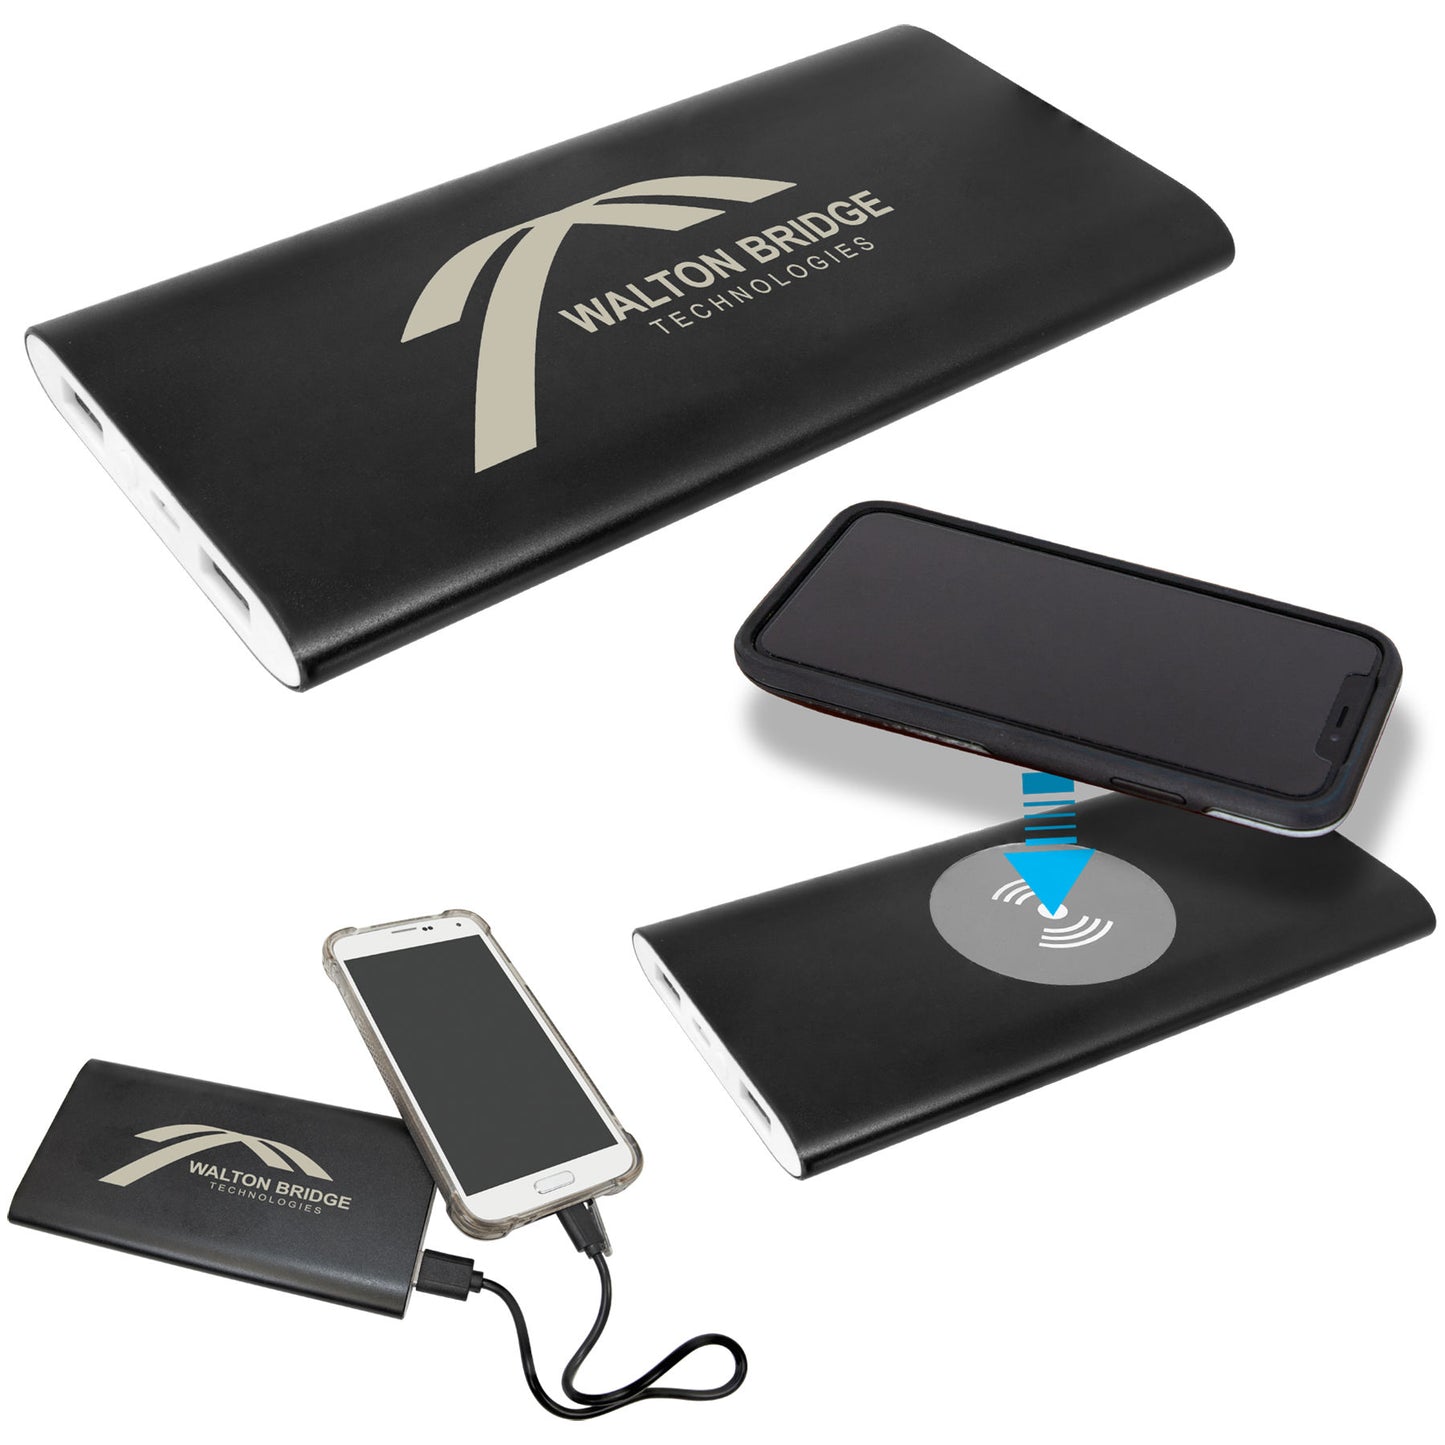 Wireless Power Bank Plug-in or Wireless Charging